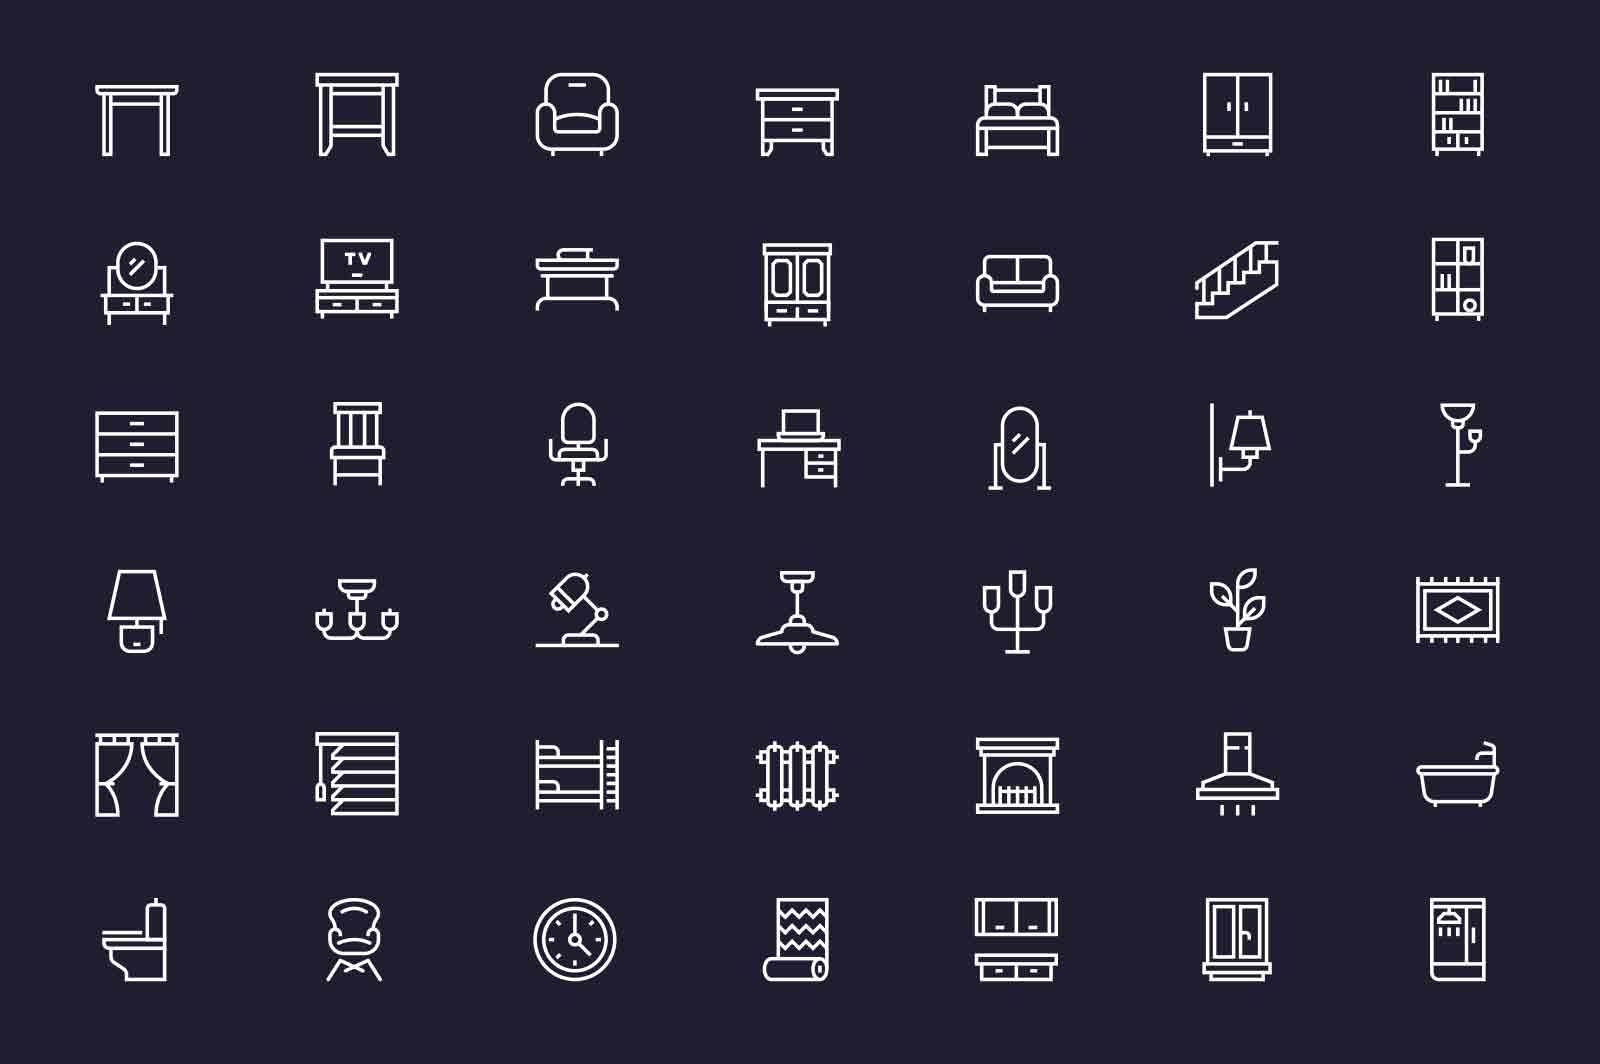 Home interior related elements icons set vector illustration. Arrange rooms in apartment line icon. Dark background